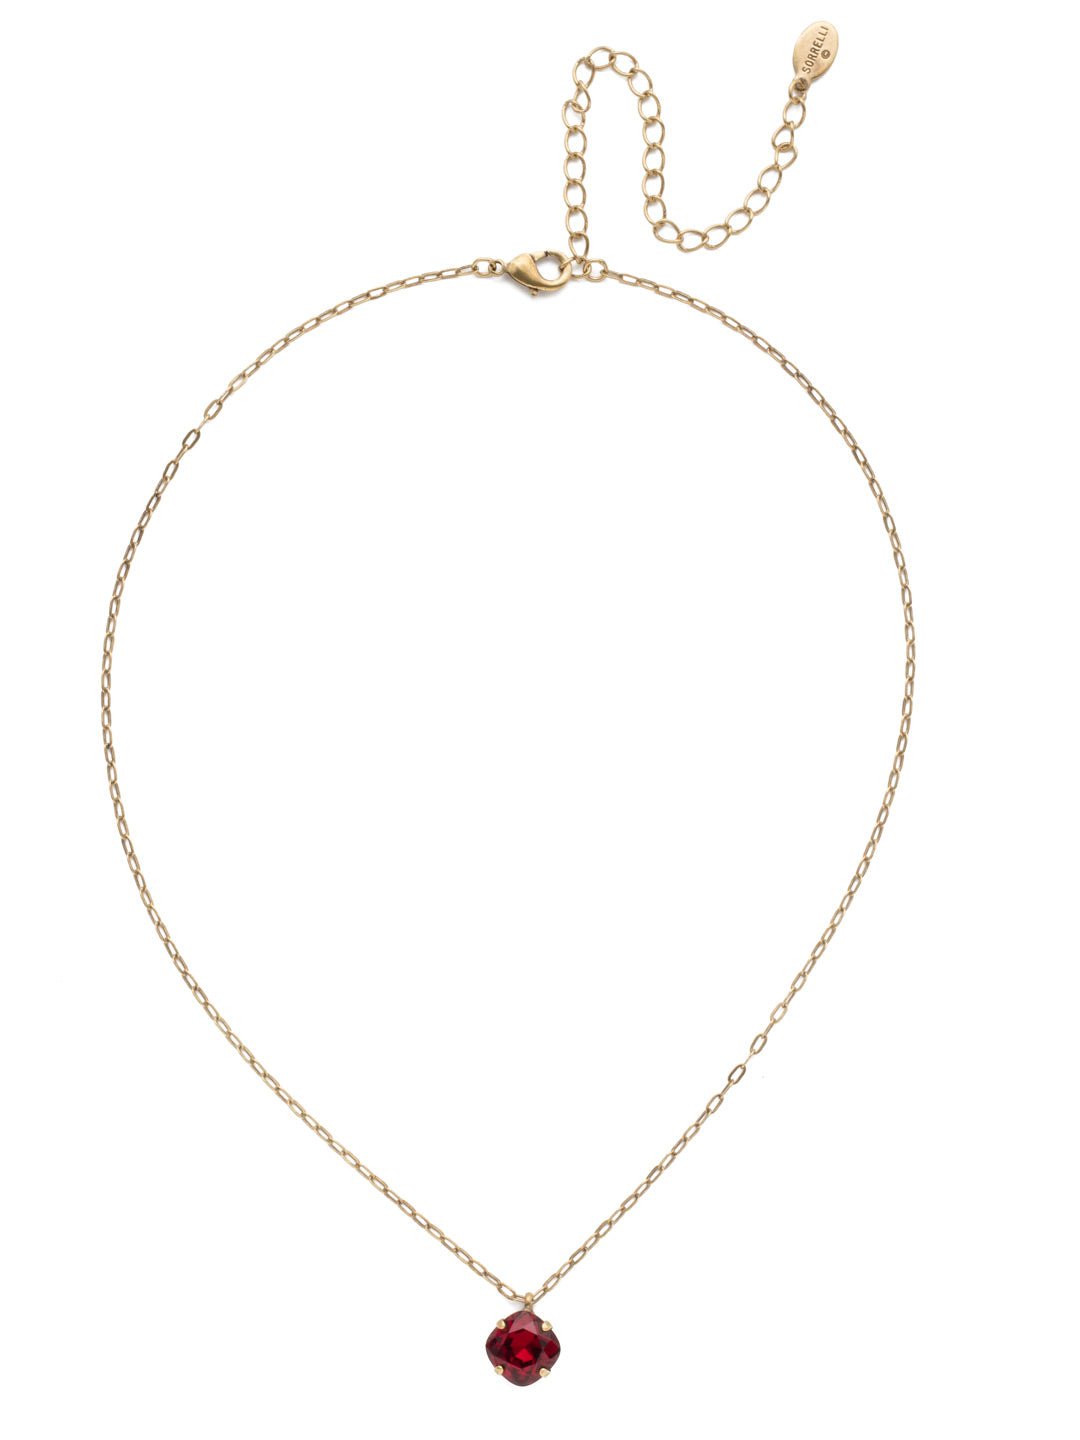 Siren Pendant Necklace - NEP22AGSI - With a cushion-cut crystal and delicate chain, the Siren Pendant  will add a litle sparkle to your everyday look. From Sorrelli's Siam collection in our Antique Gold-tone finish.